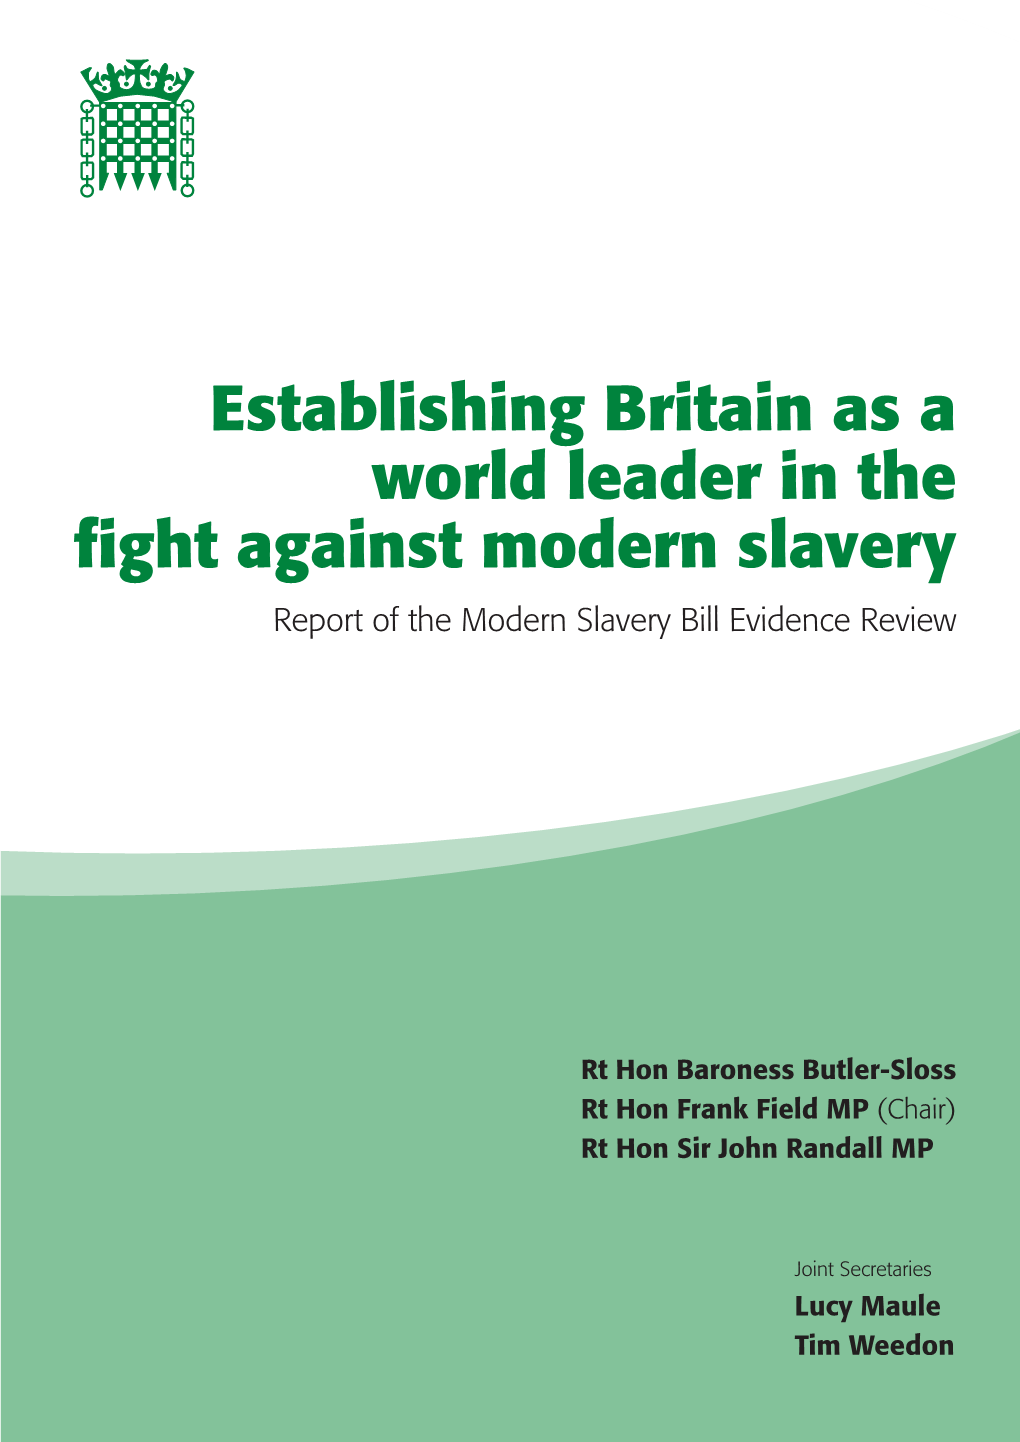 Establishing Britain As a World Leader in the Fight Against Modern Slavery